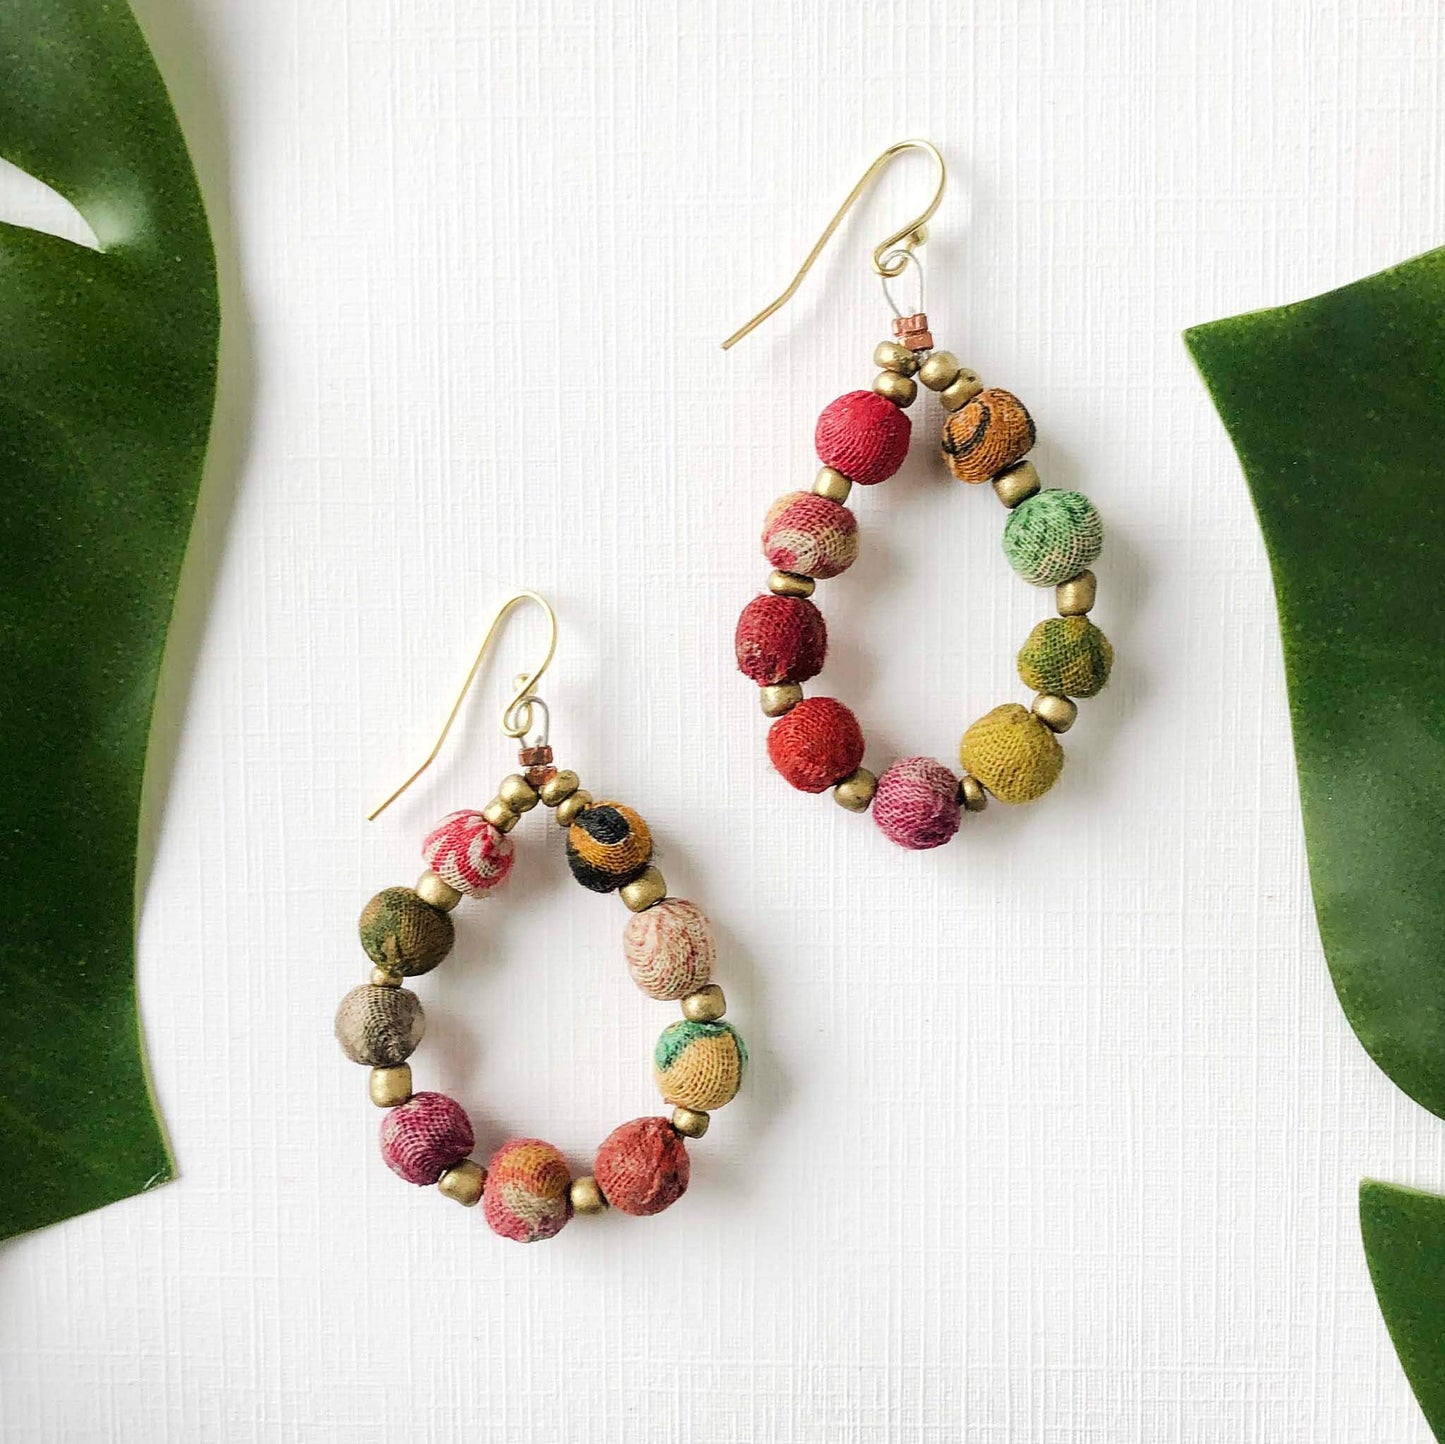 A pair of colorful textile-wrapped beaded earrings are flanked by green leaves.